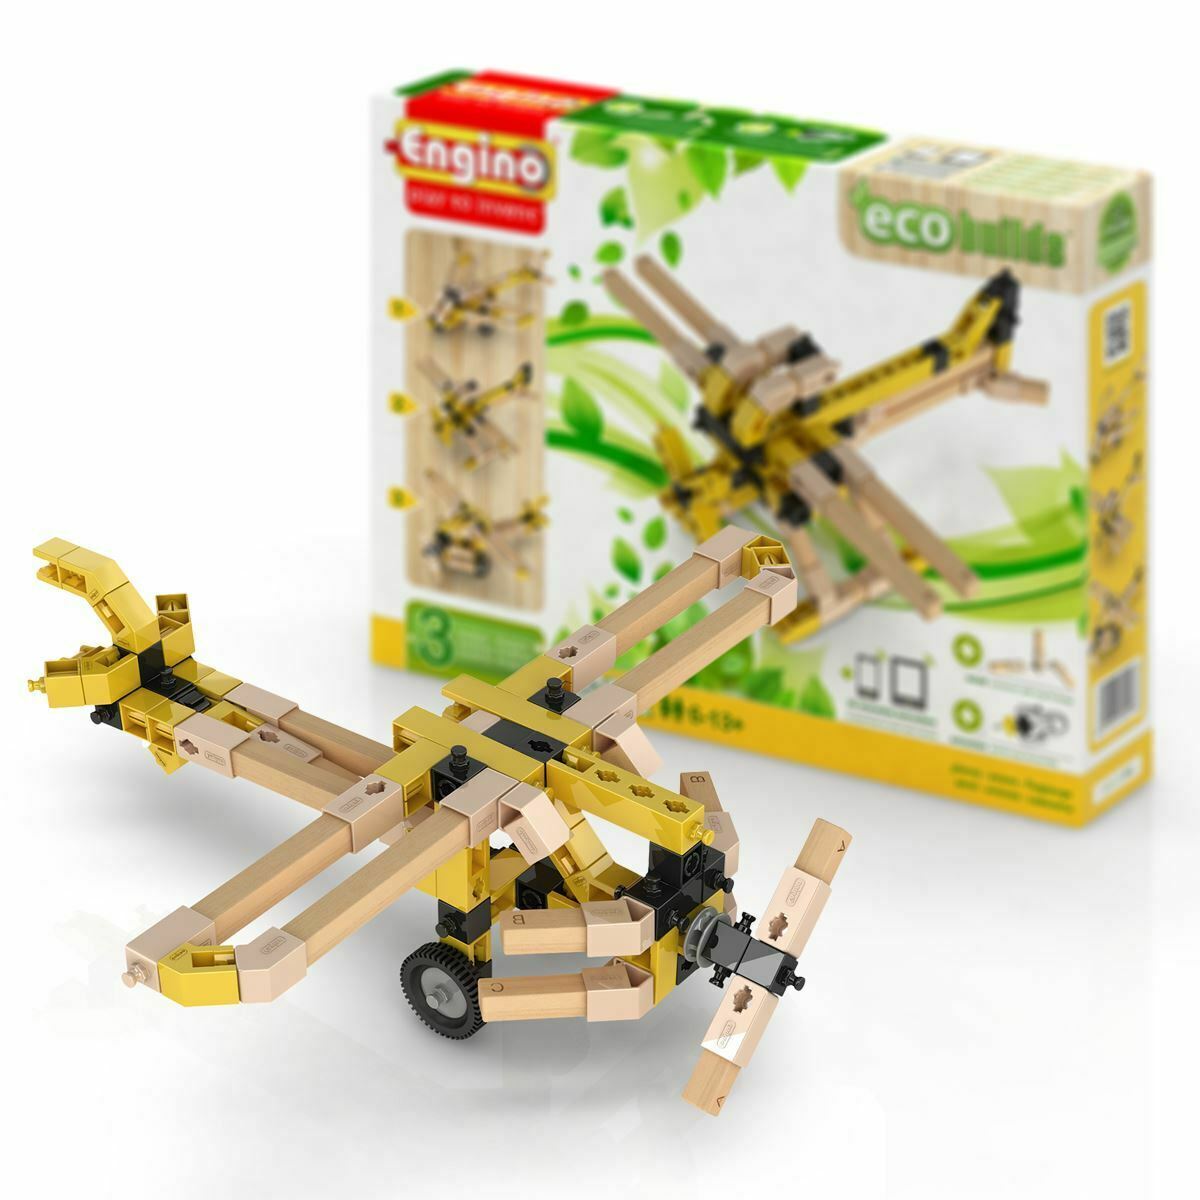 Engino Eco Builds 3 Model PLANES Building Creative Activity Wooden Toy STEM